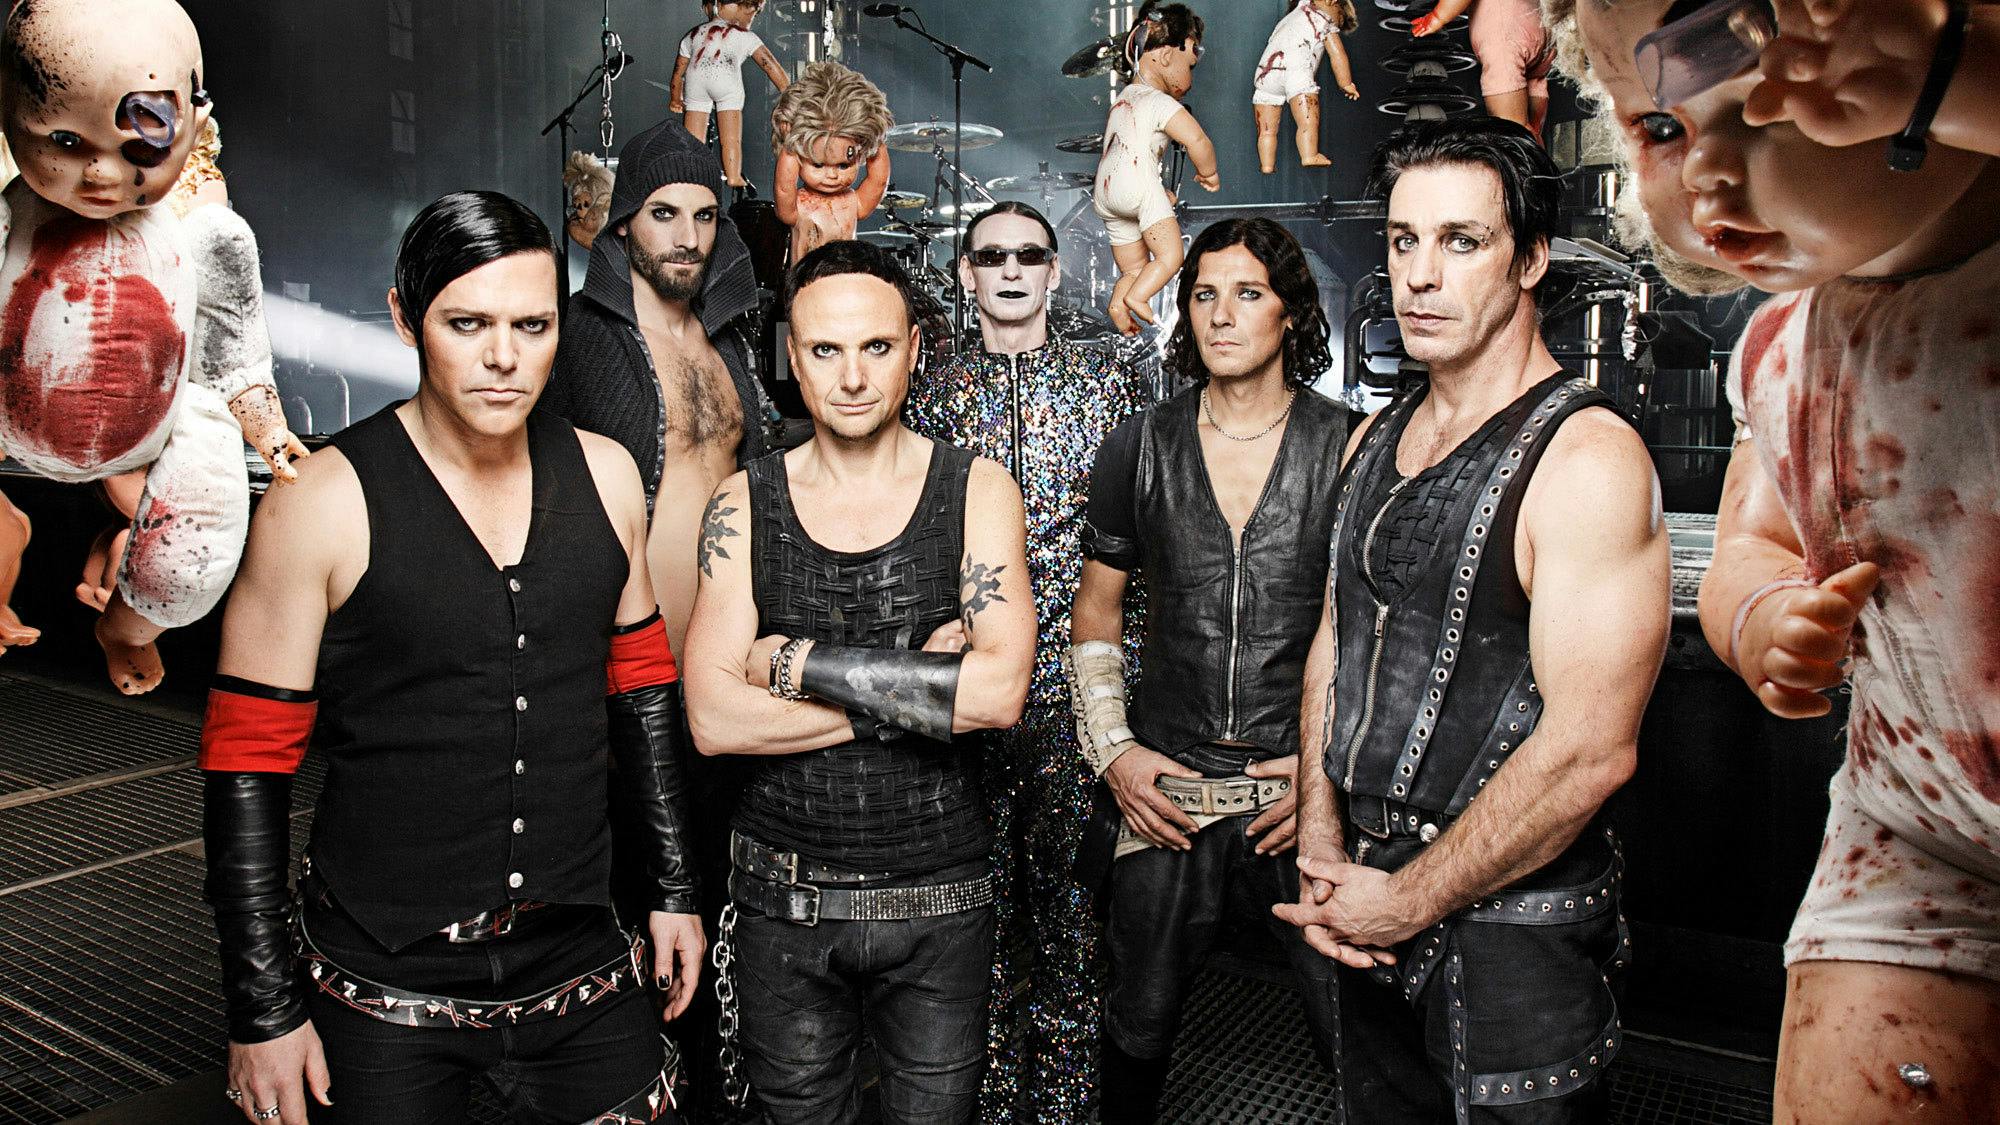 Astronaut in space is the first person to hear a brand-new Rammstein song